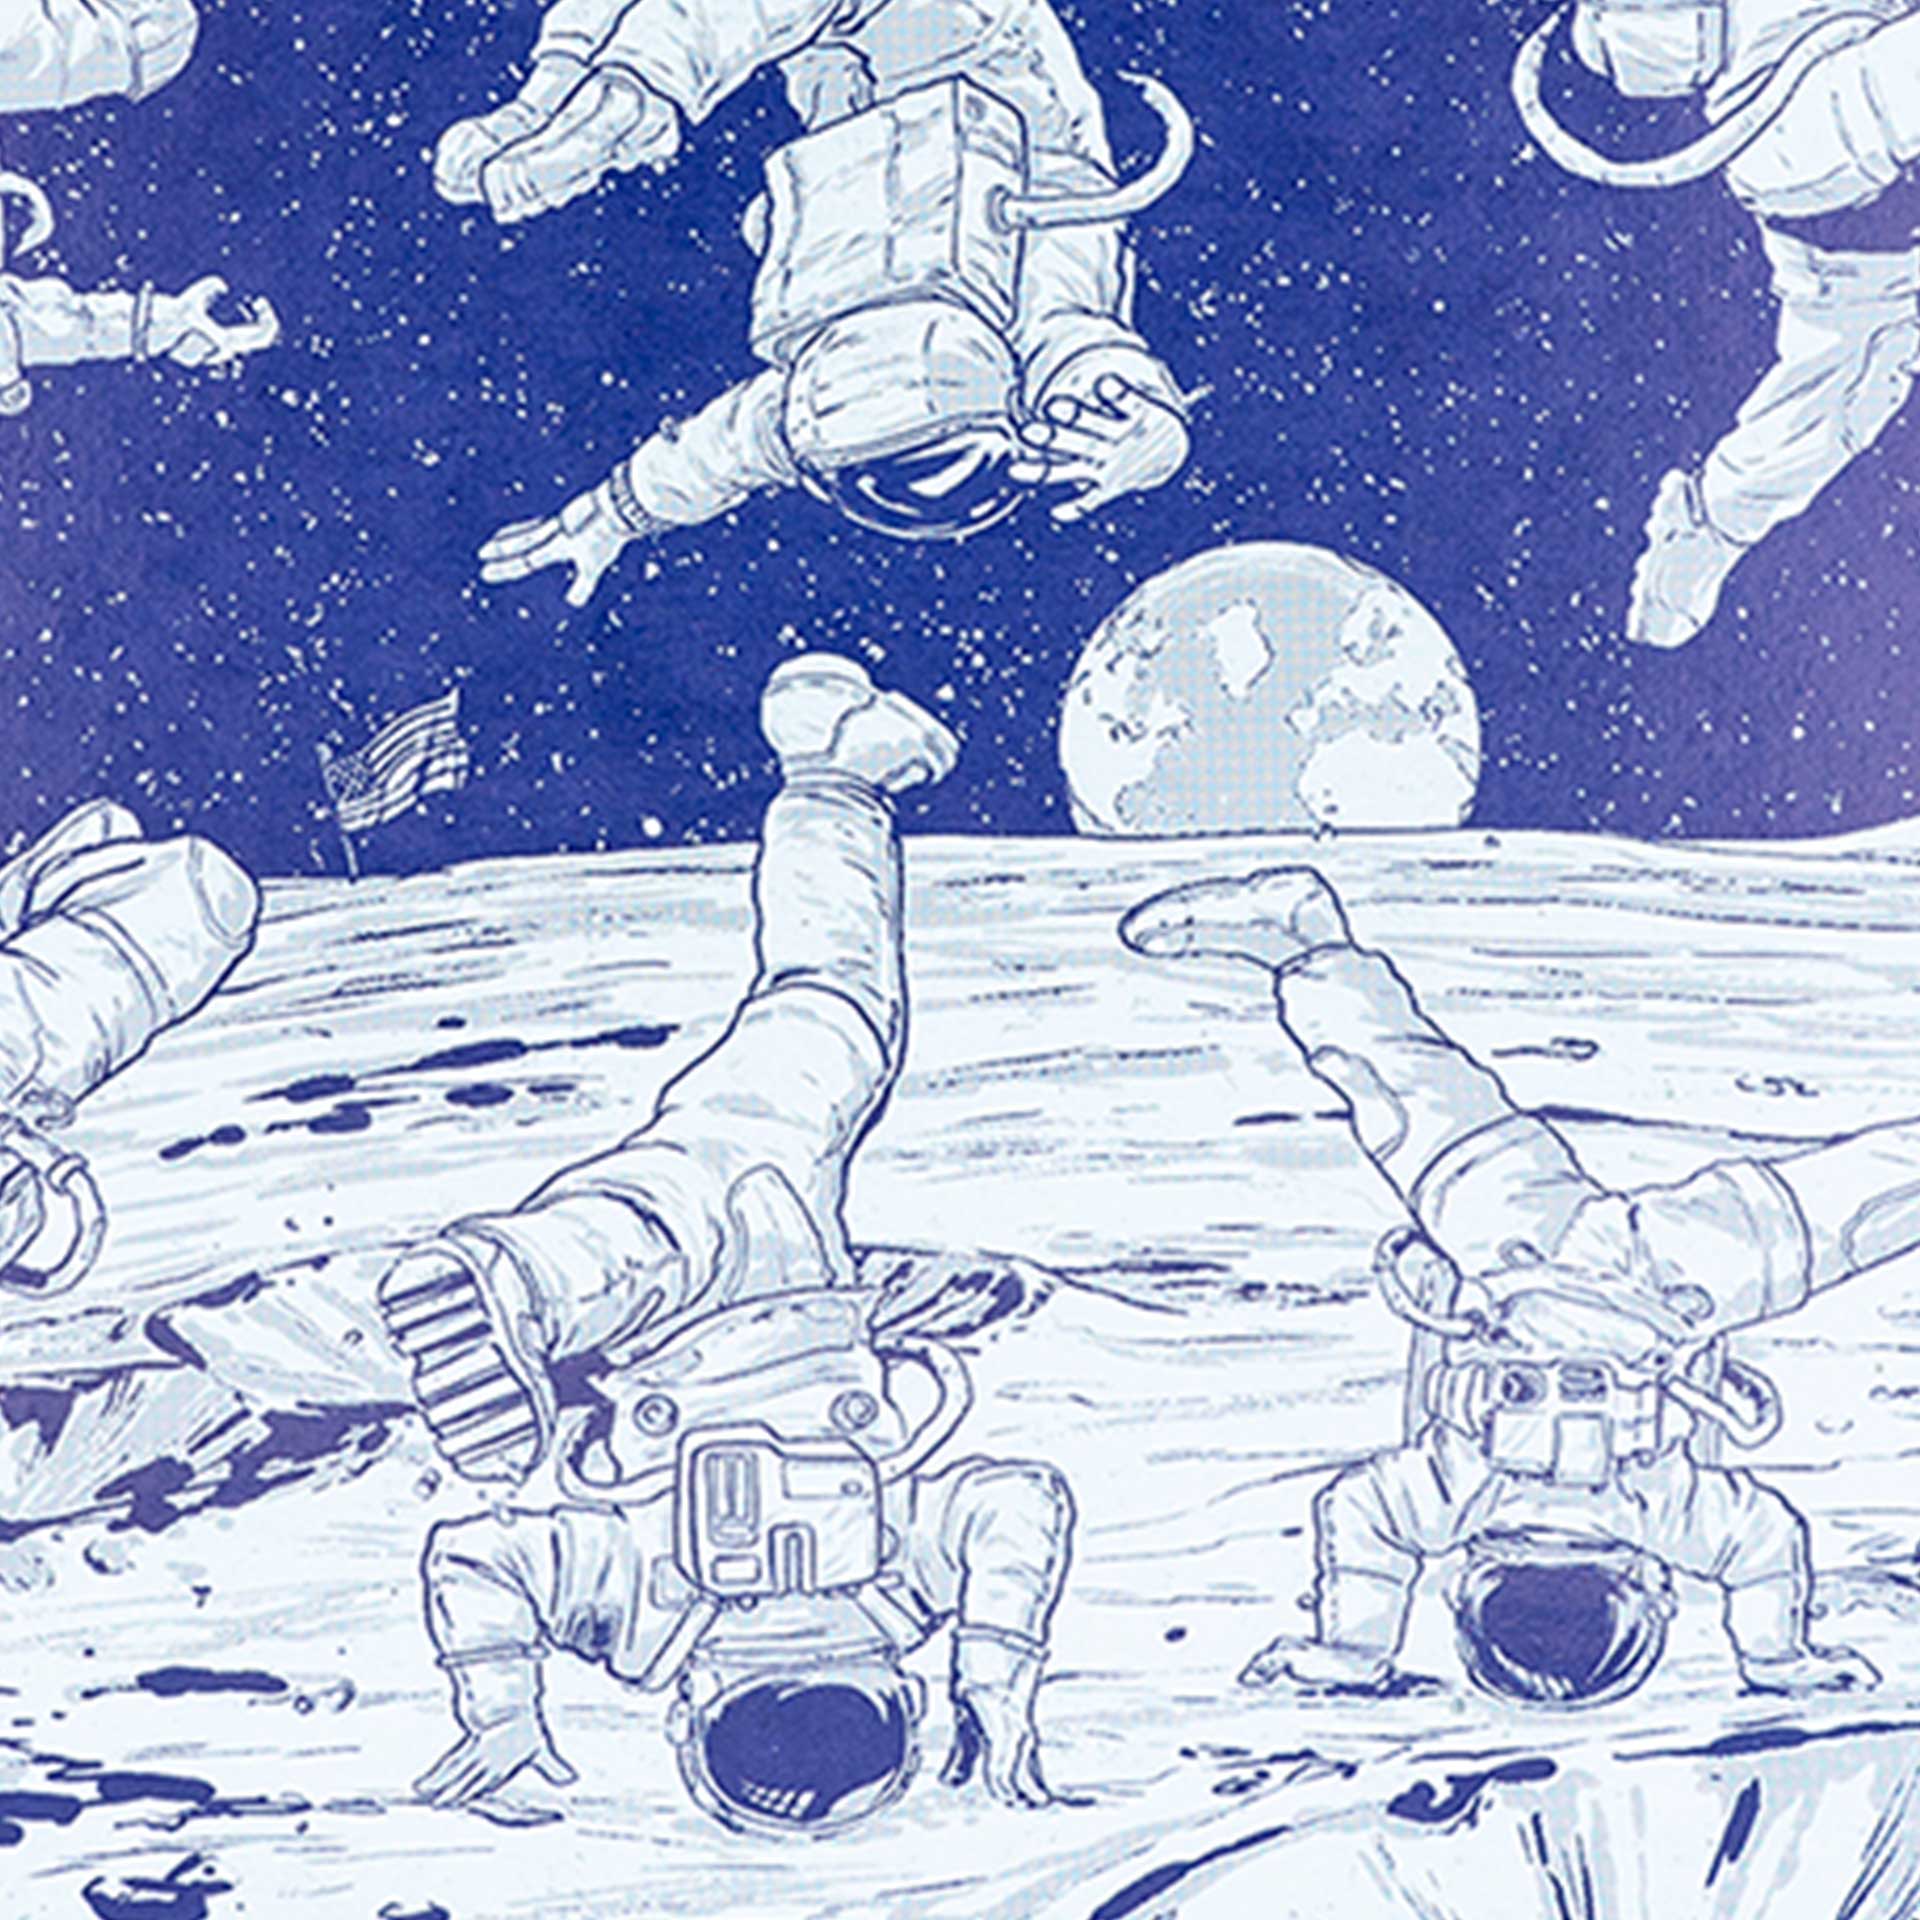 Closeup of breakdancing astronauts on the moon